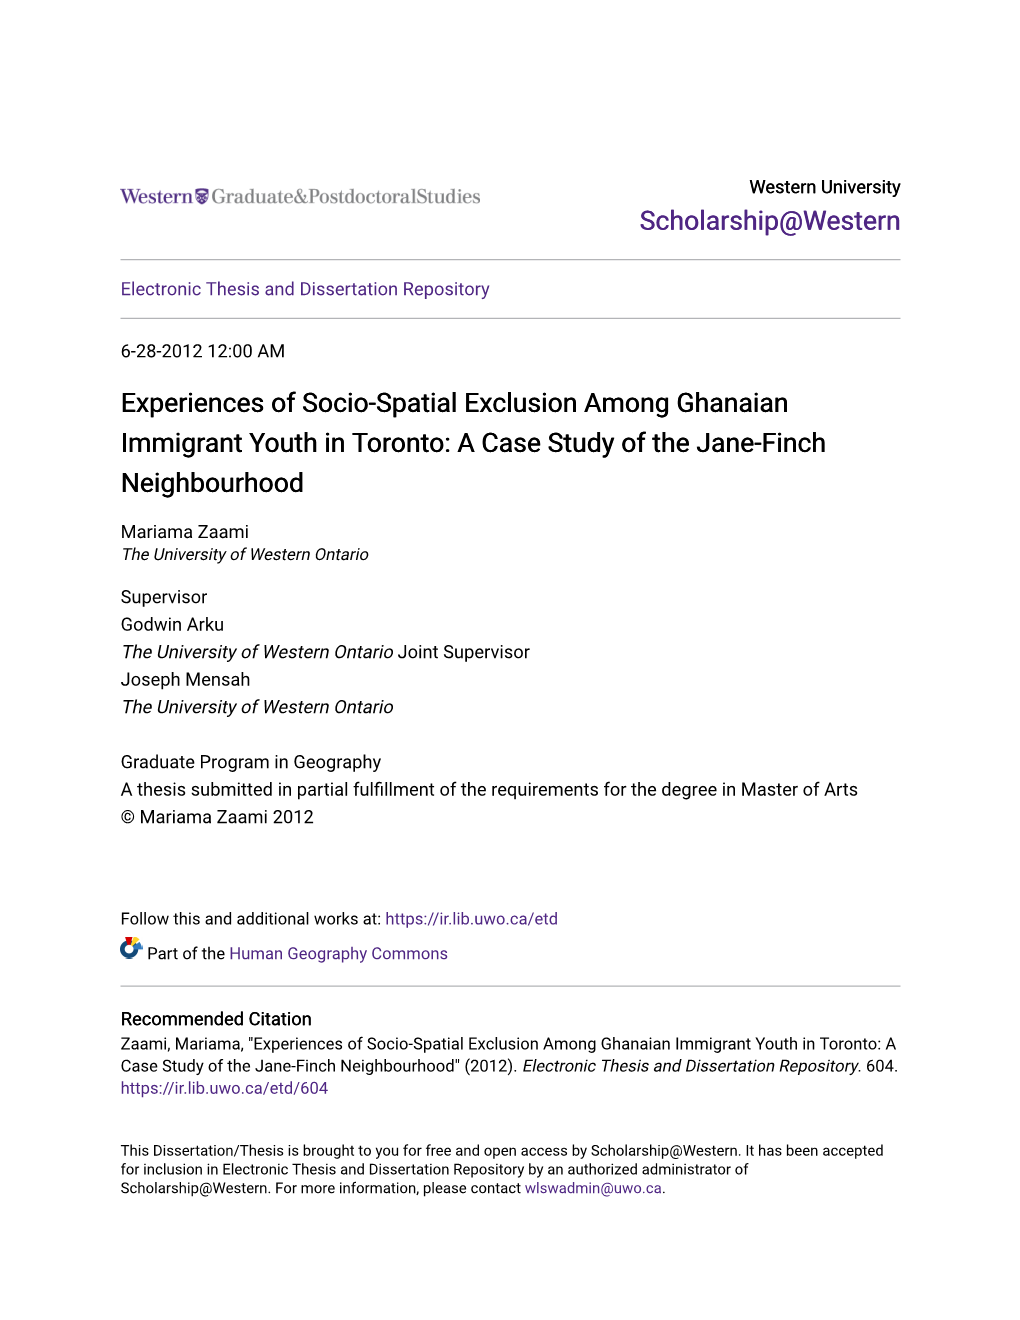 Experiences of Socio-Spatial Exclusion Among Ghanaian Immigrant Youth in Toronto: a Case Study of the Jane-Finch Neighbourhood